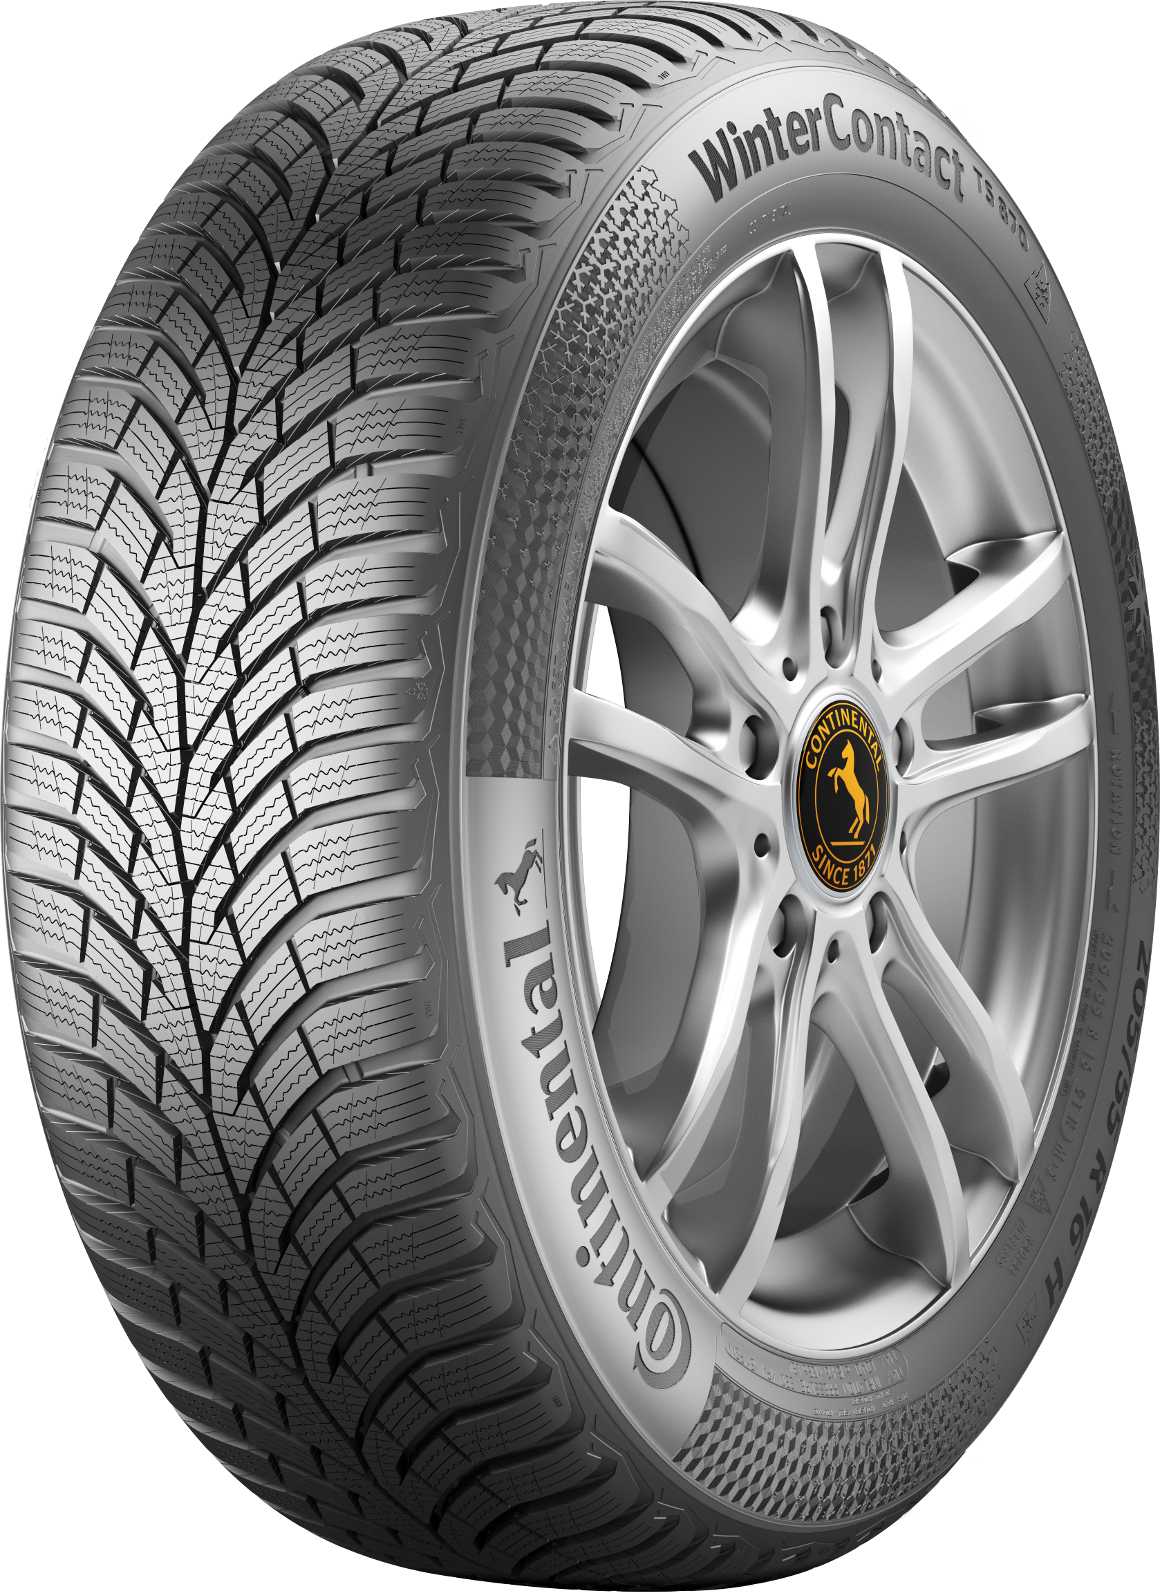    Continental Winter Contact TS870 195/60 R16 